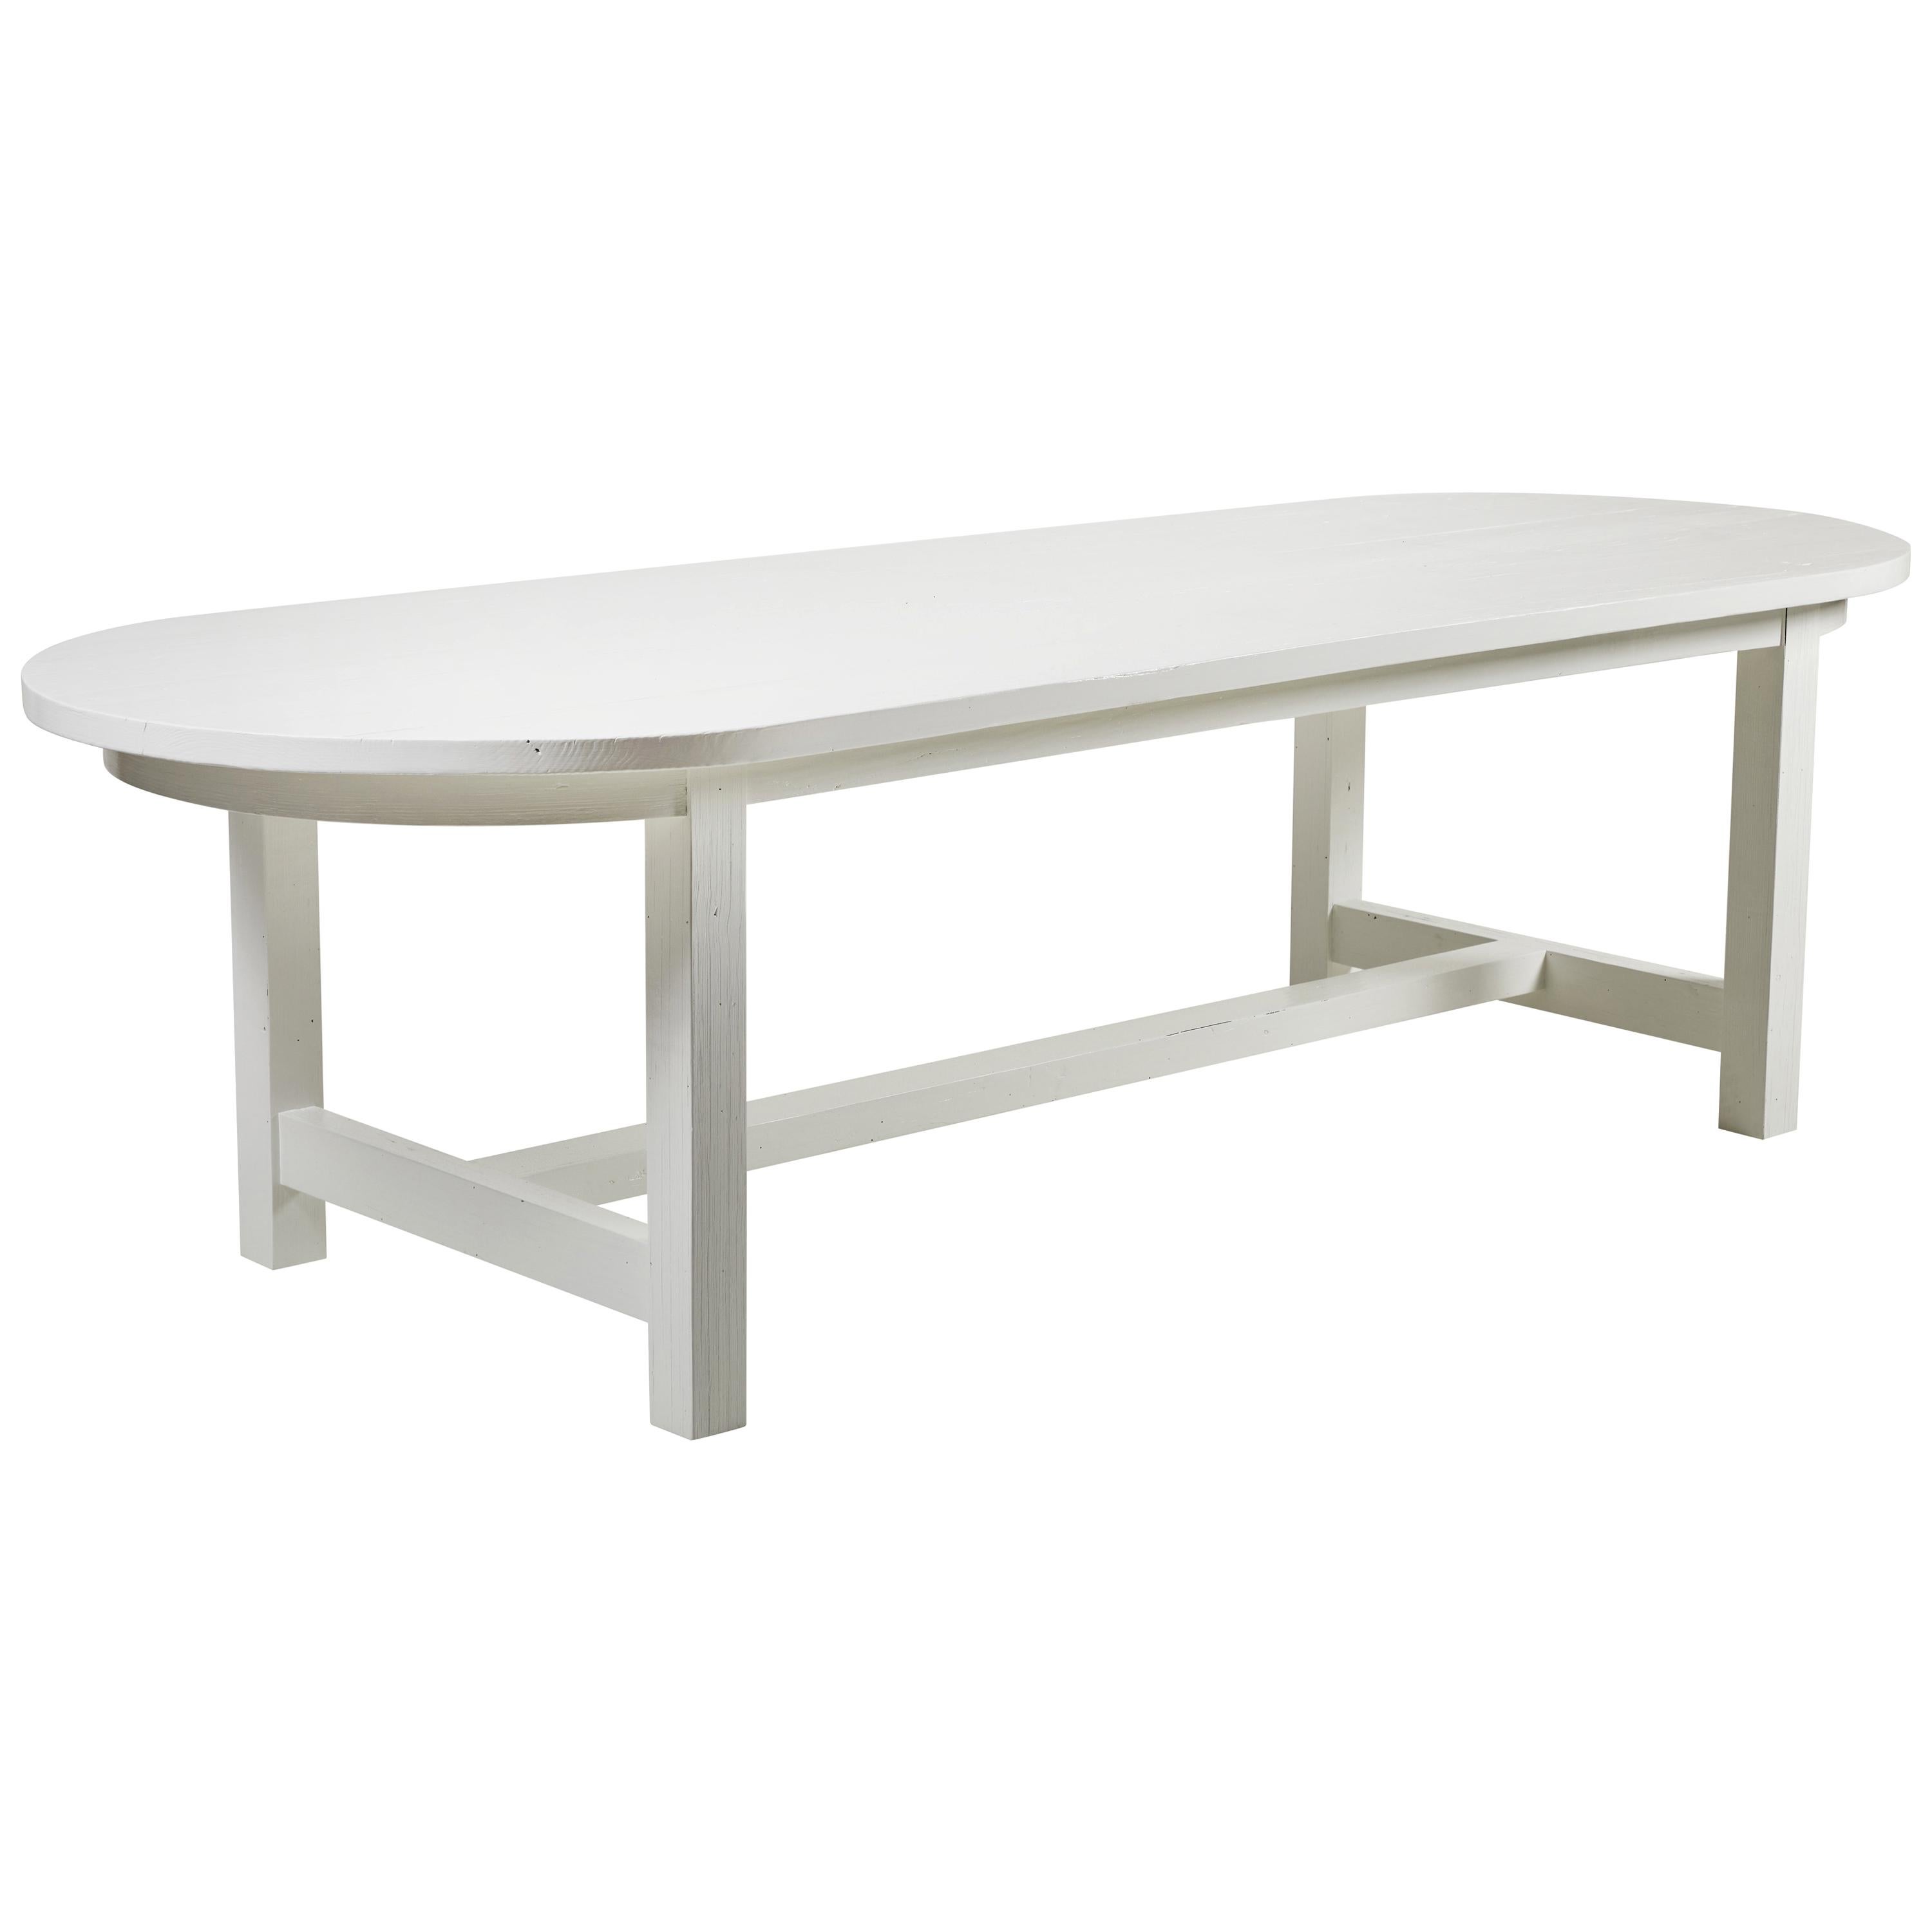 Nickey Kehoe Collection White Painted Oval Harvest Dining Table